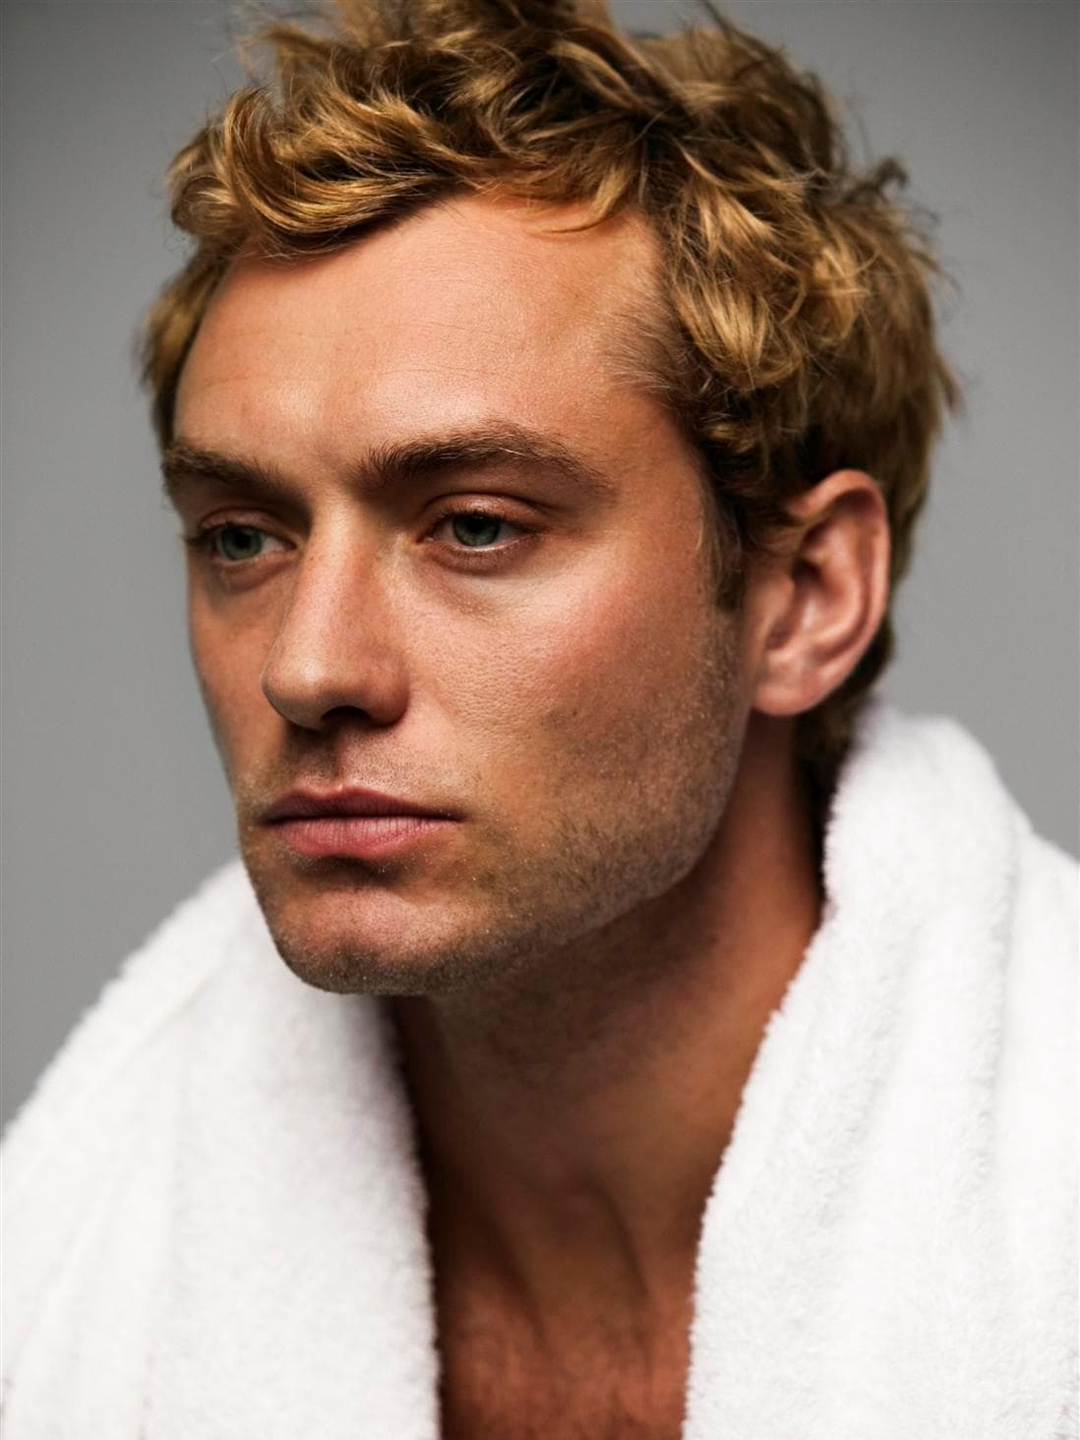 Jude Law current look